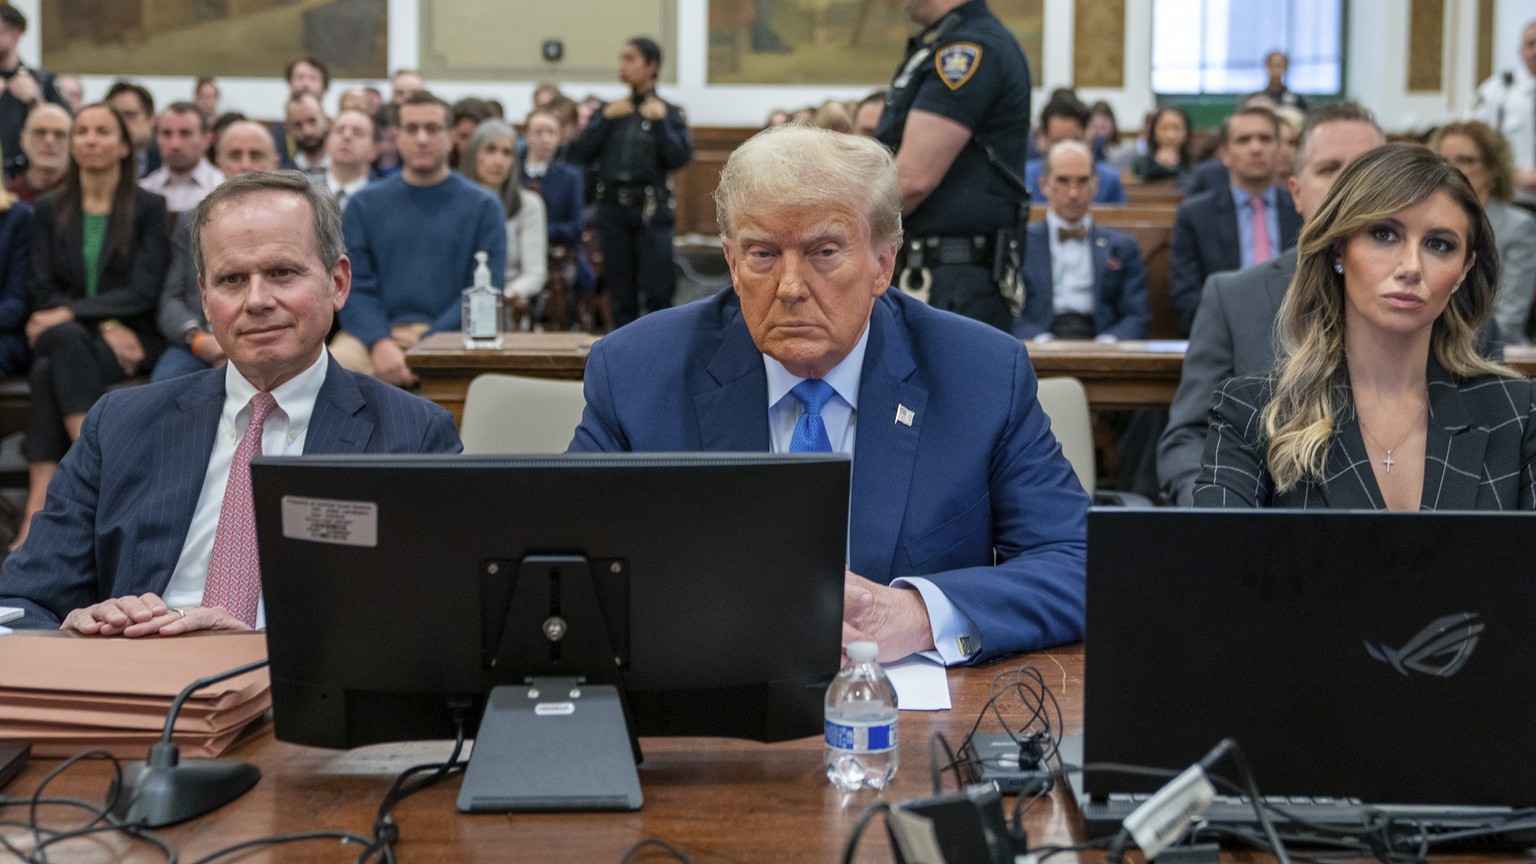 Former President Donald Trump waits to take the witness stand at New York Supreme Court in New York on Monday, Nov. 6, 2023. (David Dee Delgado/Pool Photo via AP)